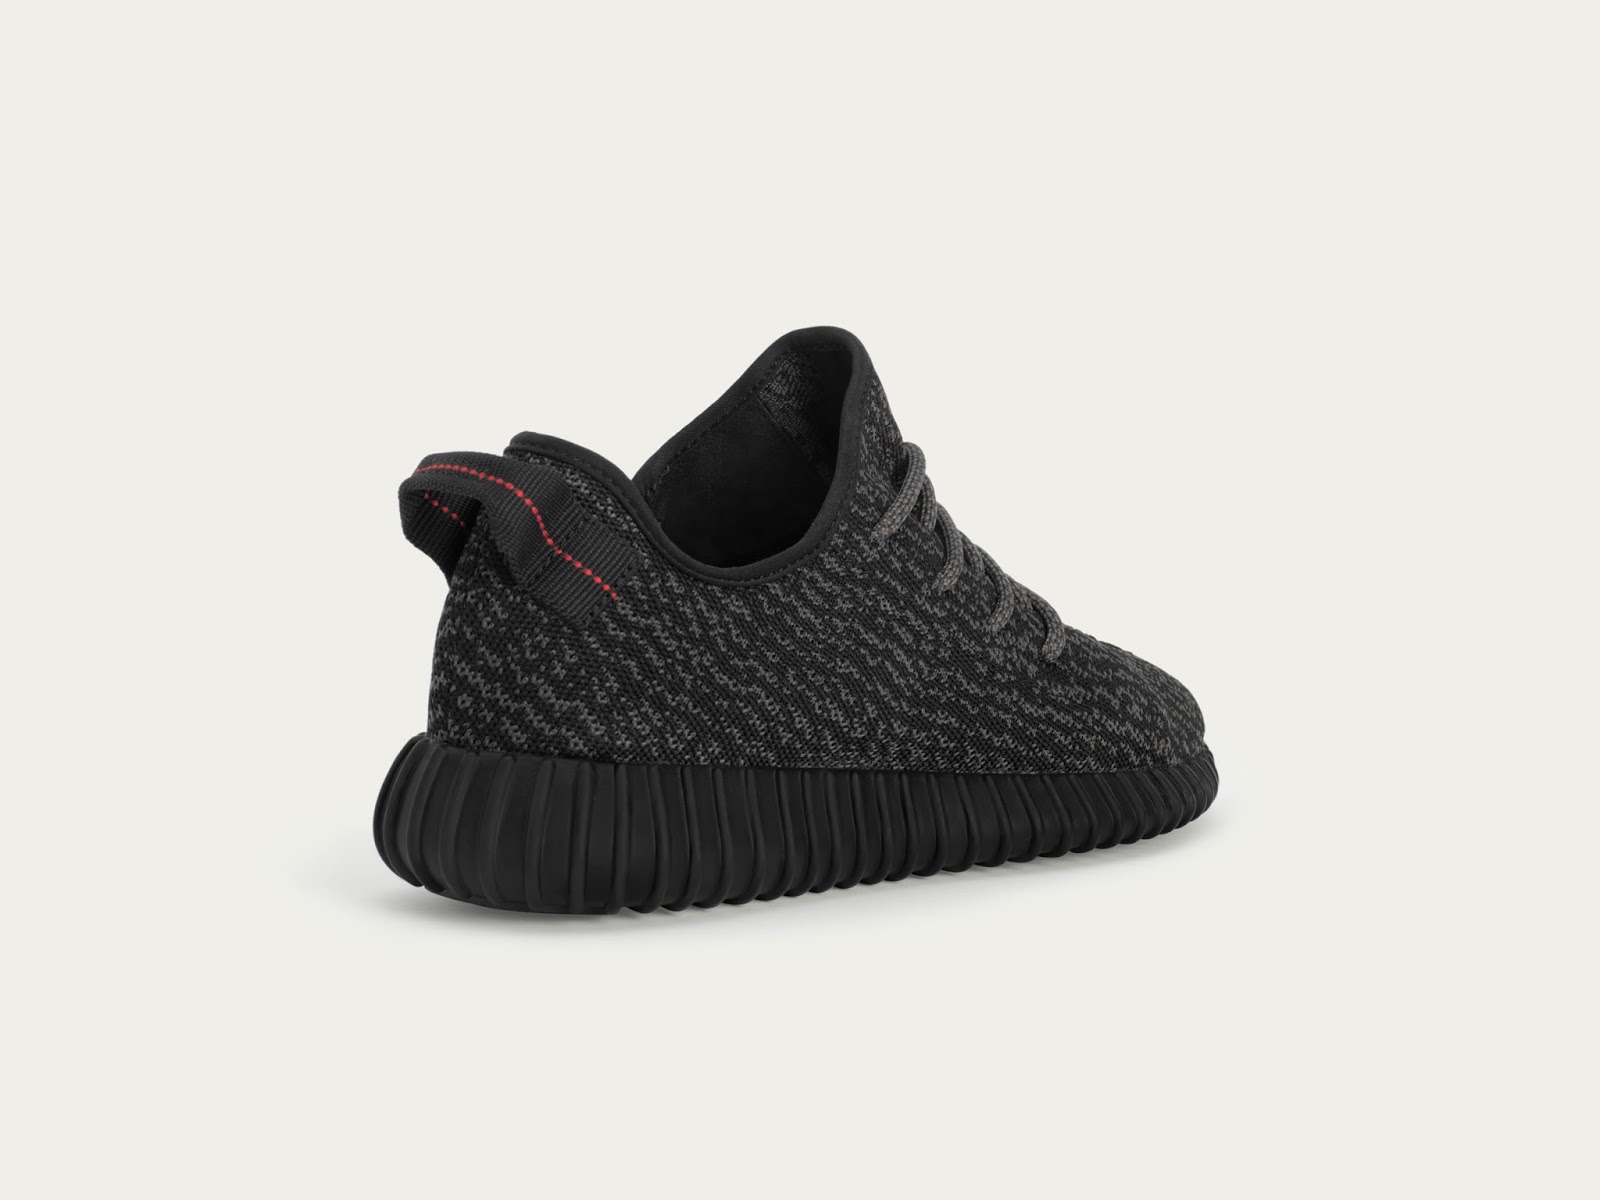 yeezy boost 950 south africa price